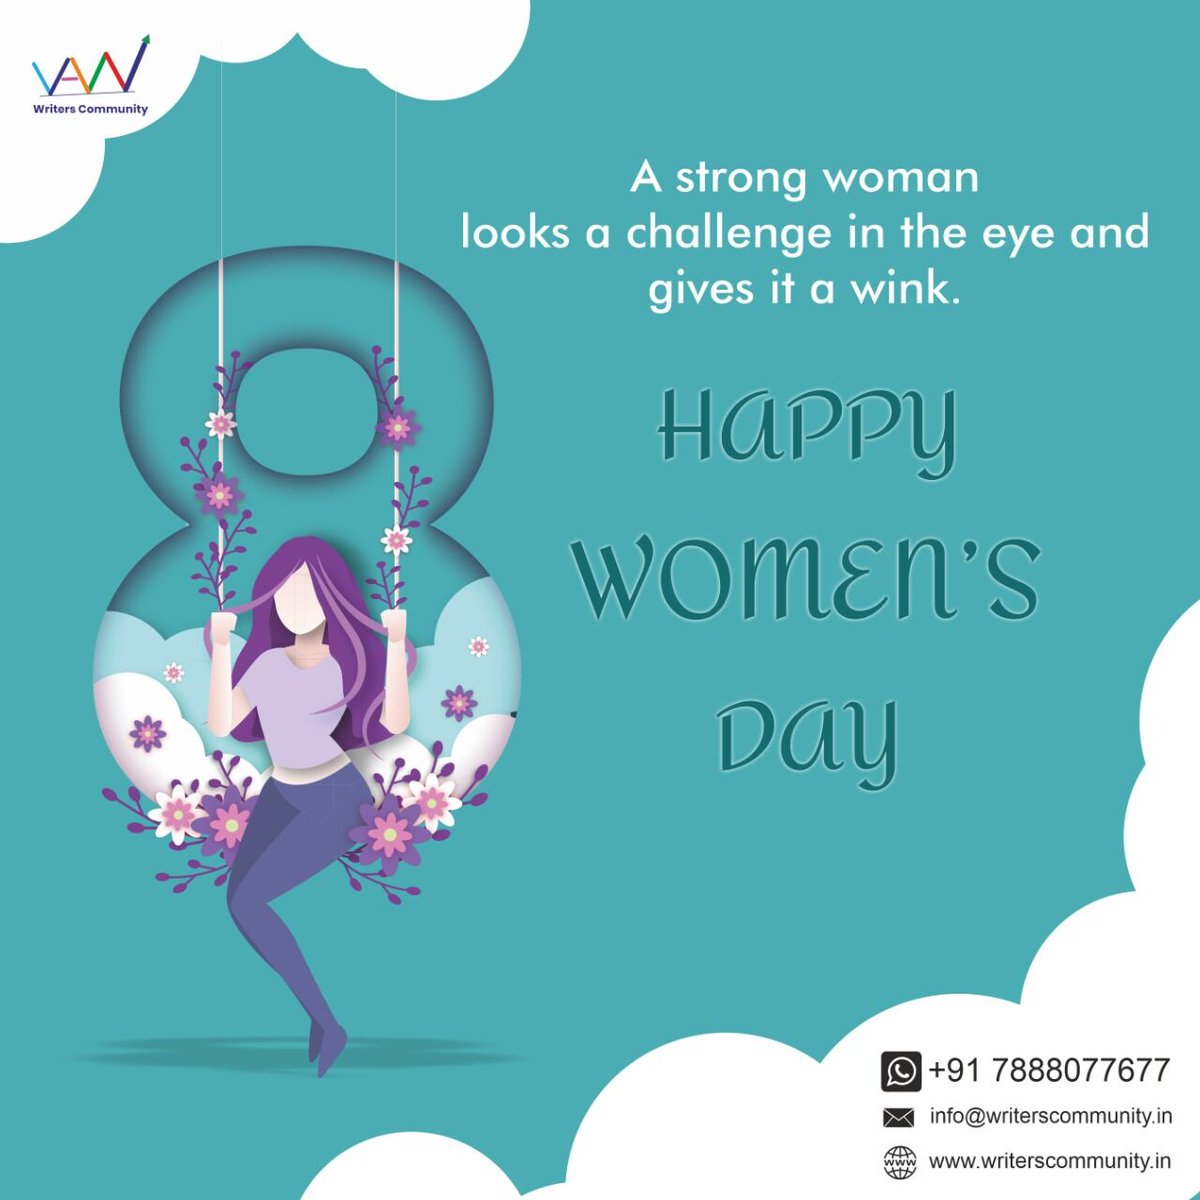 Happy Women's Day to all Women! A strong woman looks a challenge in the eye and gives it a wink. #womendays #womanday #womanauthor #womanwriter #writers